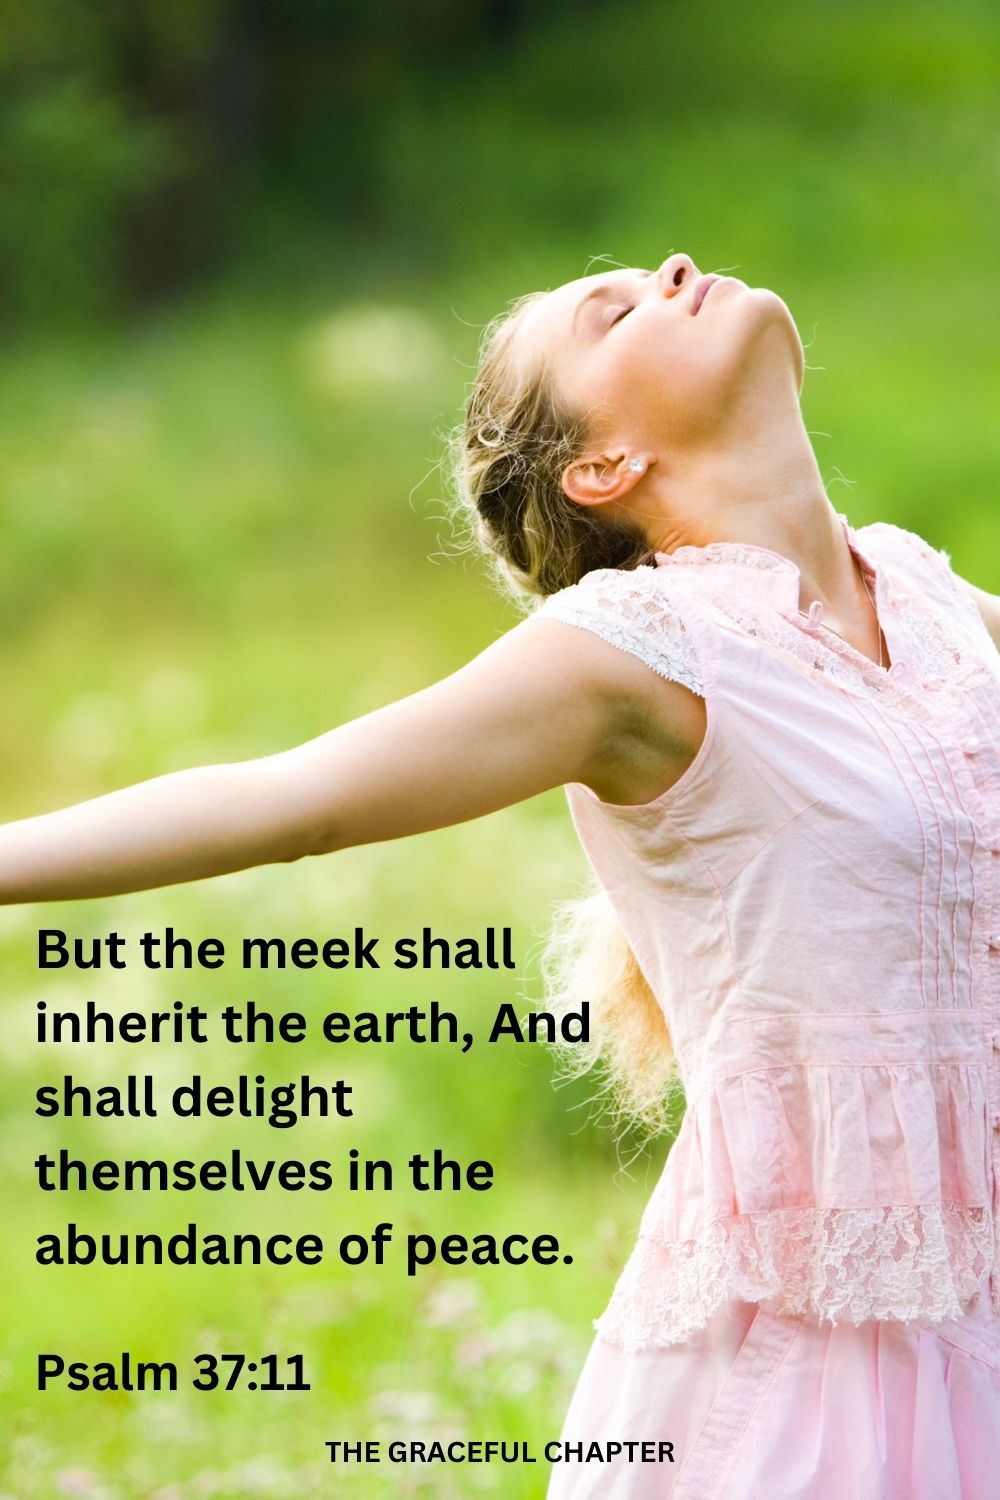 But the meek shall inherit the earth, And shall delight themselves in the abundance of peace. Psalm 37:11